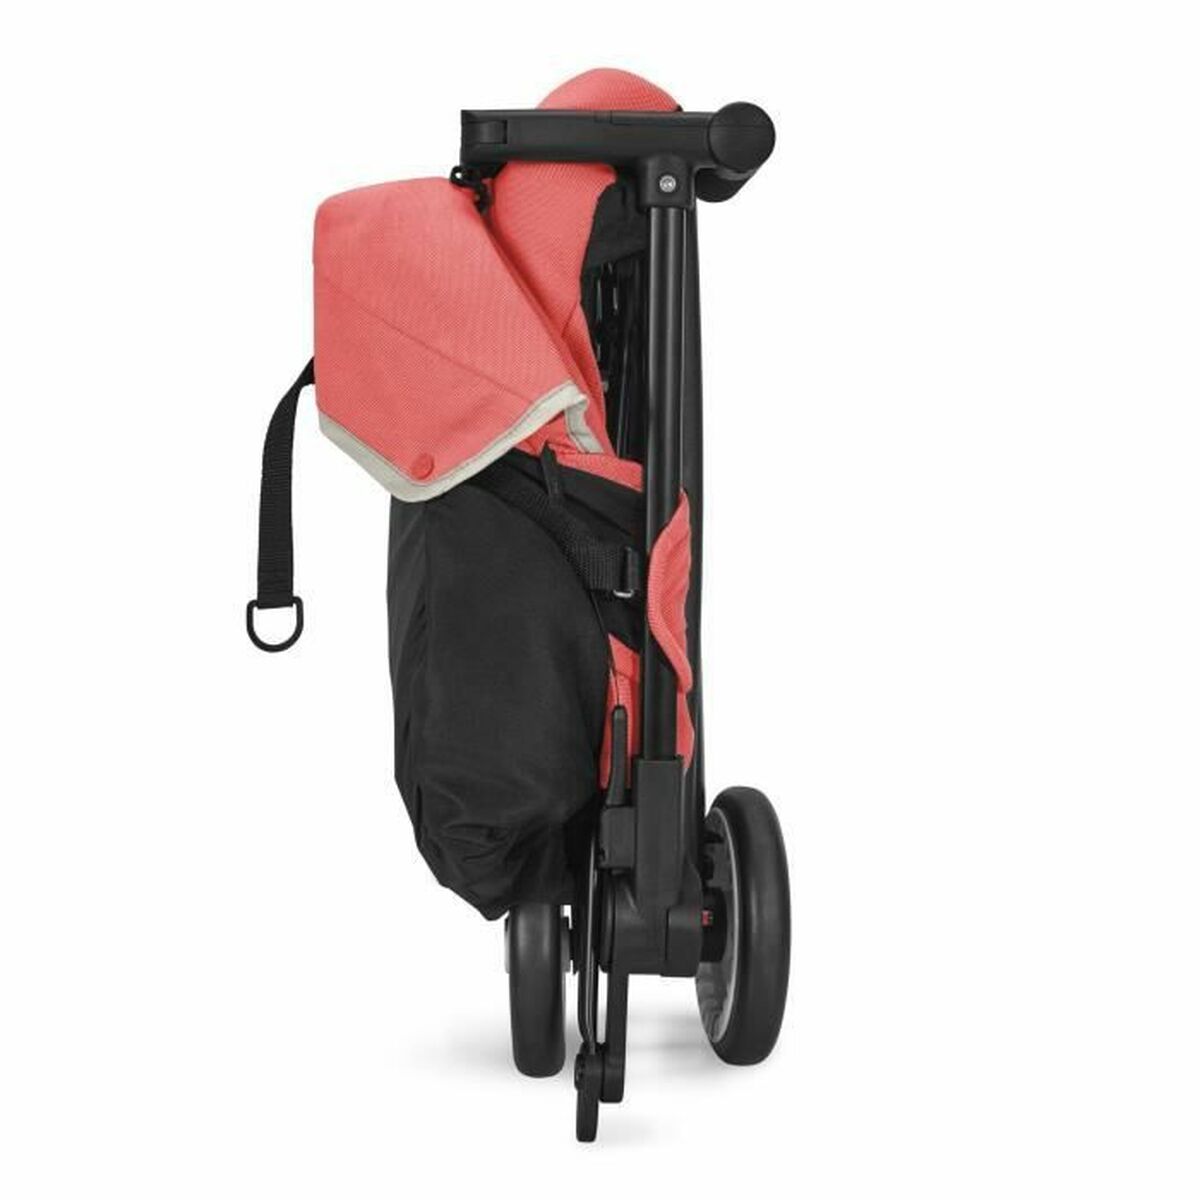 Baby's Pushchair Cybex Libelle Red